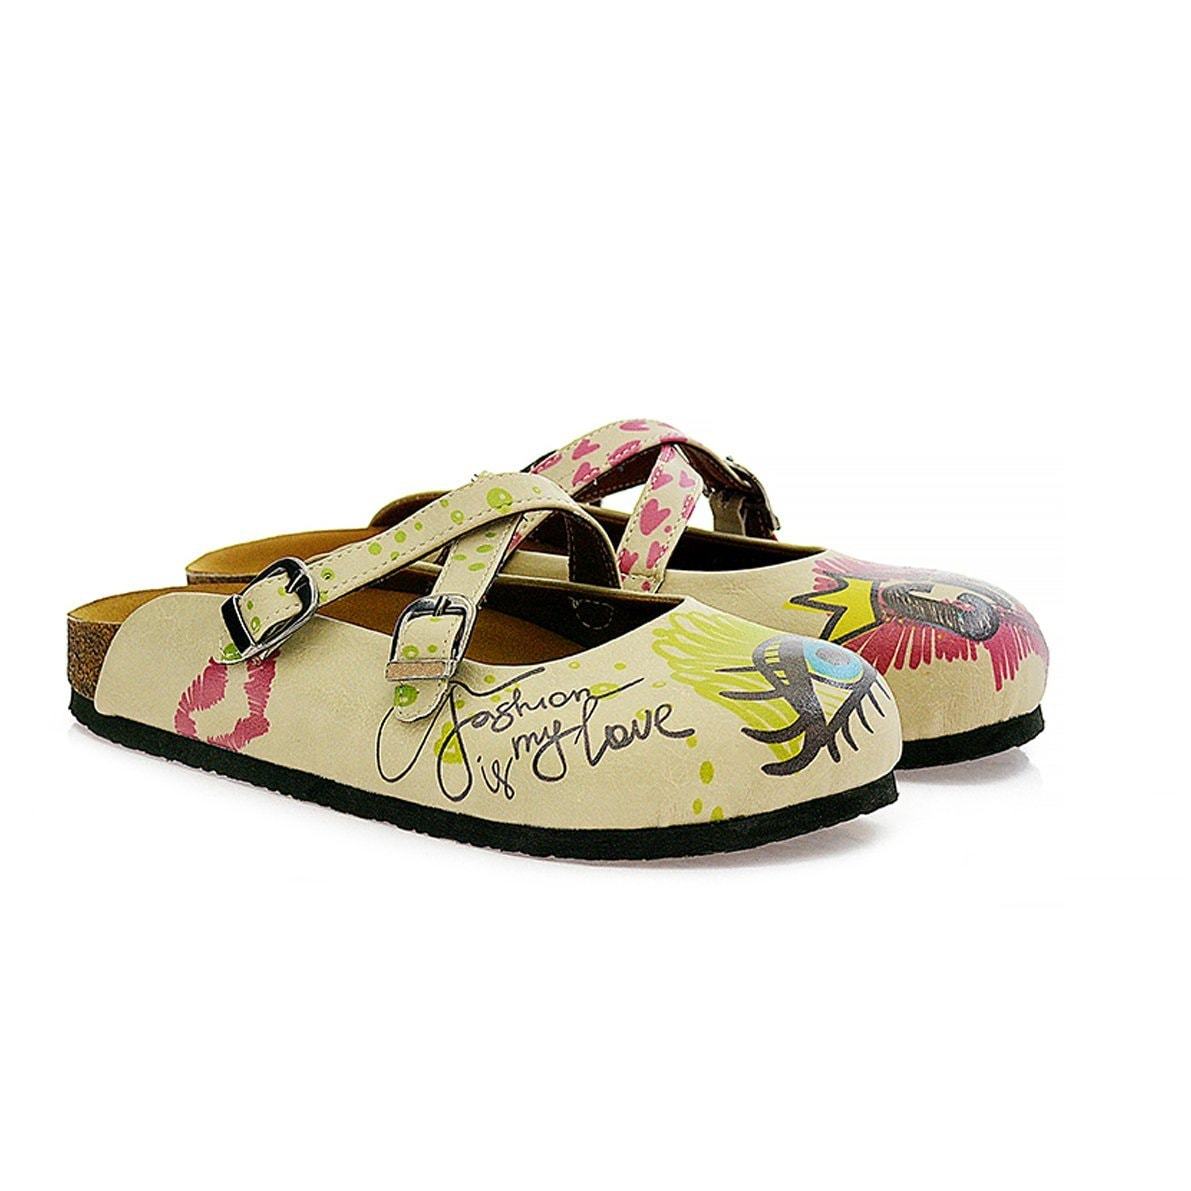 Purple, Green, Yellow, Blue Eyes, Purple Heart, Green Round, Girl and Fashion is My Love Written Beige Patterned Clogs - CAL114